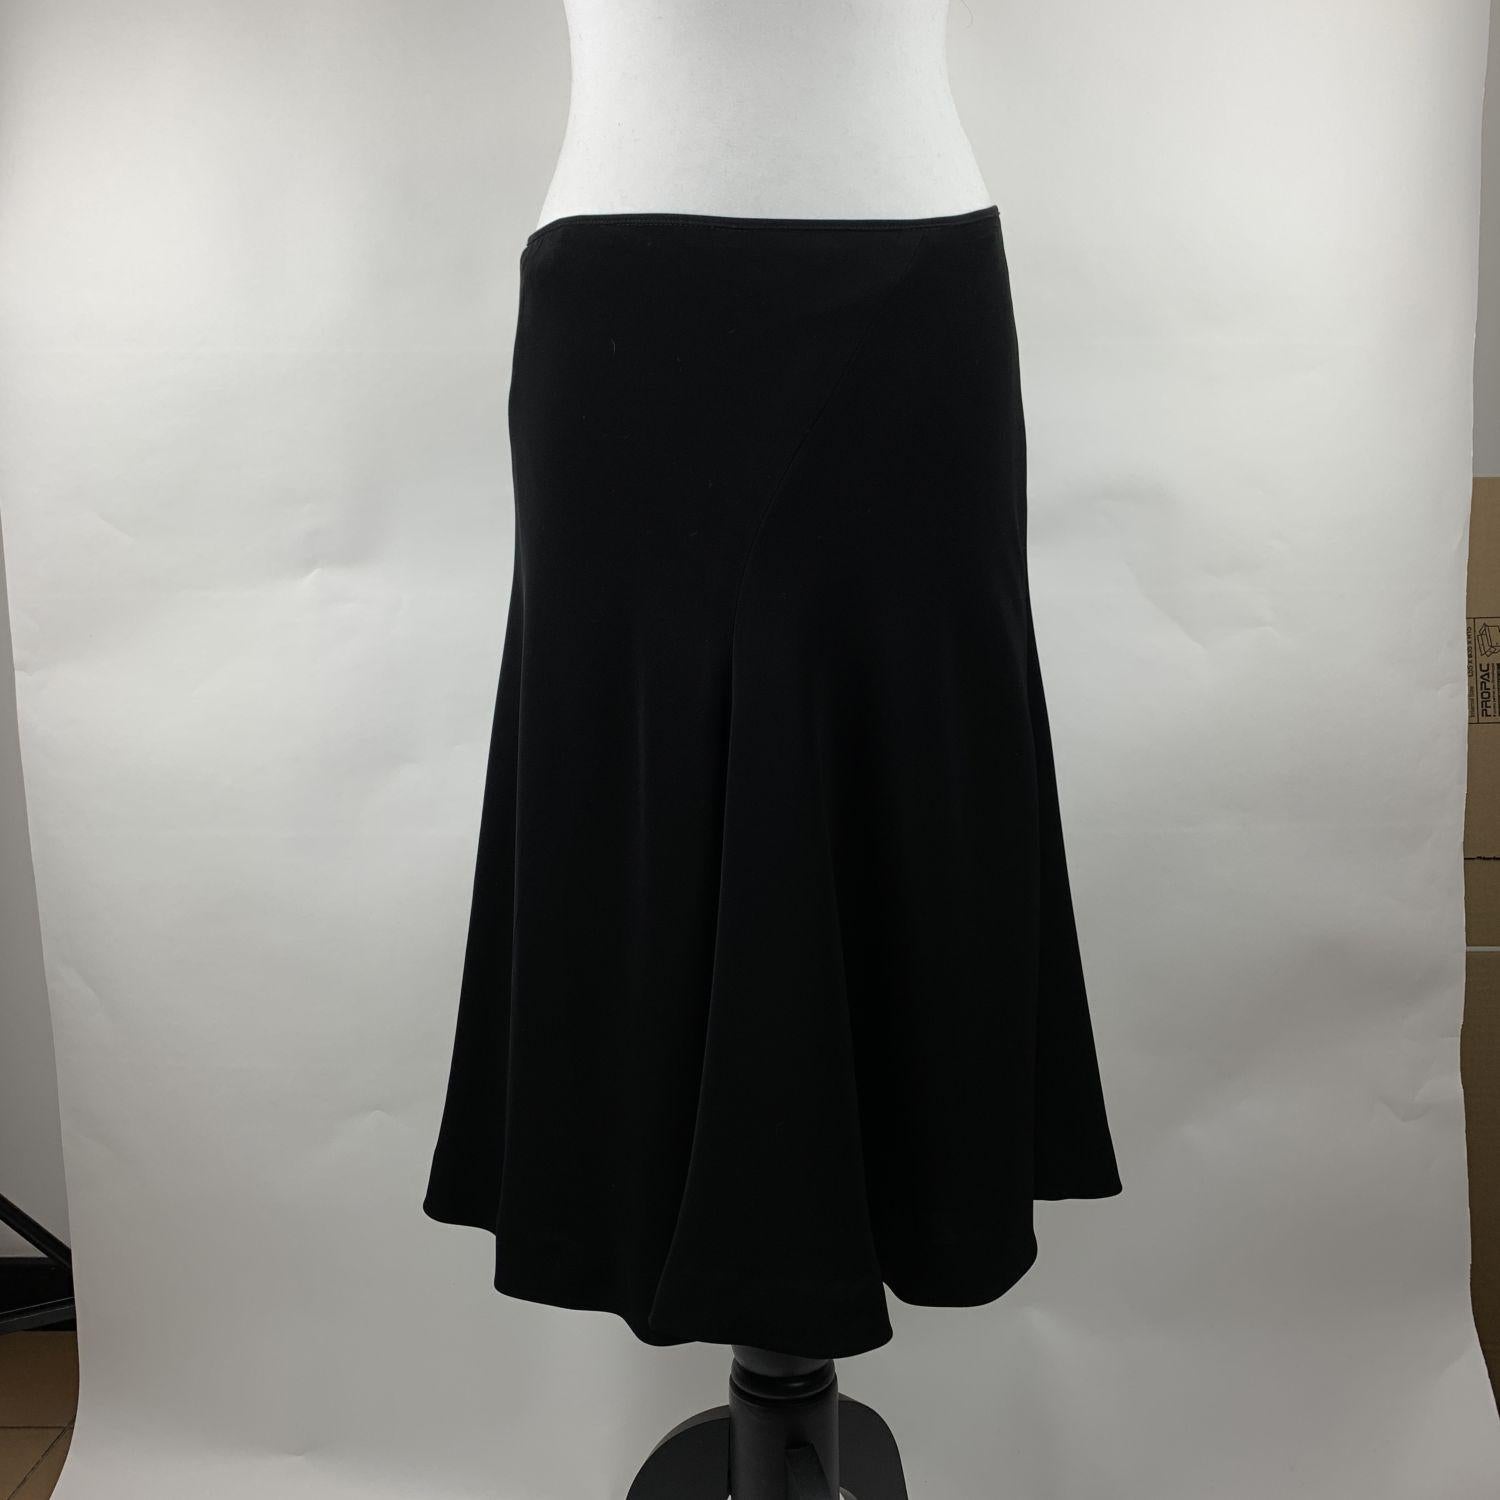 Les Copains black flared skirt. Zip closure. Composition: 100% Polyethilene. Size : 44 IT (The size shown for this item is the size indicated by the designer on the label). It should correspond to a MEDIUM size.

Details

MATERIAL: Rayon

COLOR: